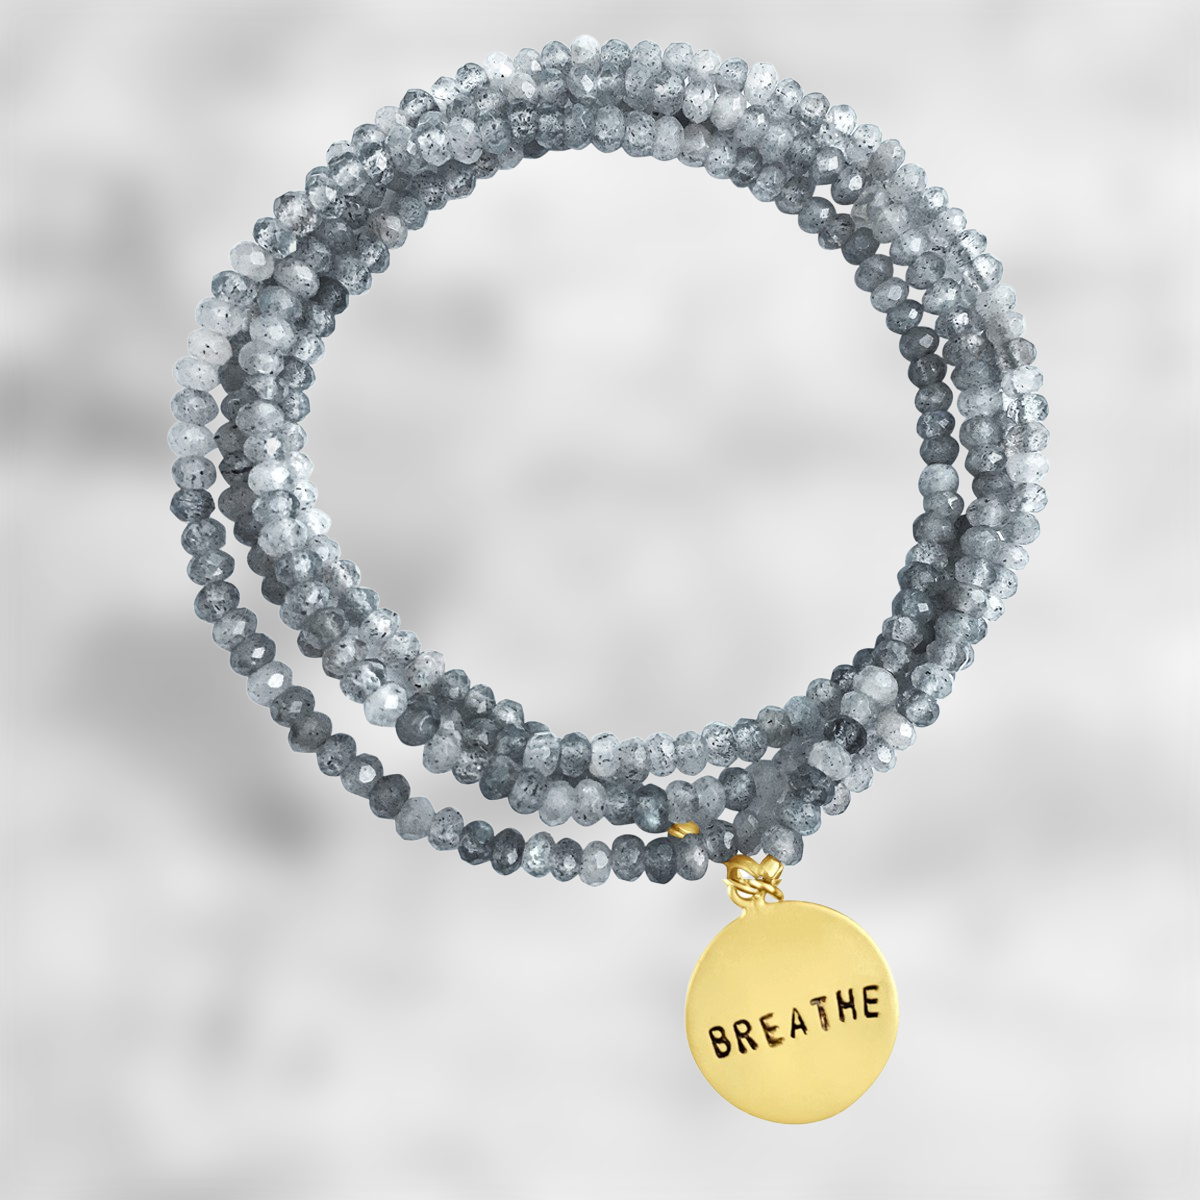 Gold BREATHE Wrap Bracelet with Labradorite to bring amazing Changes in Your Life